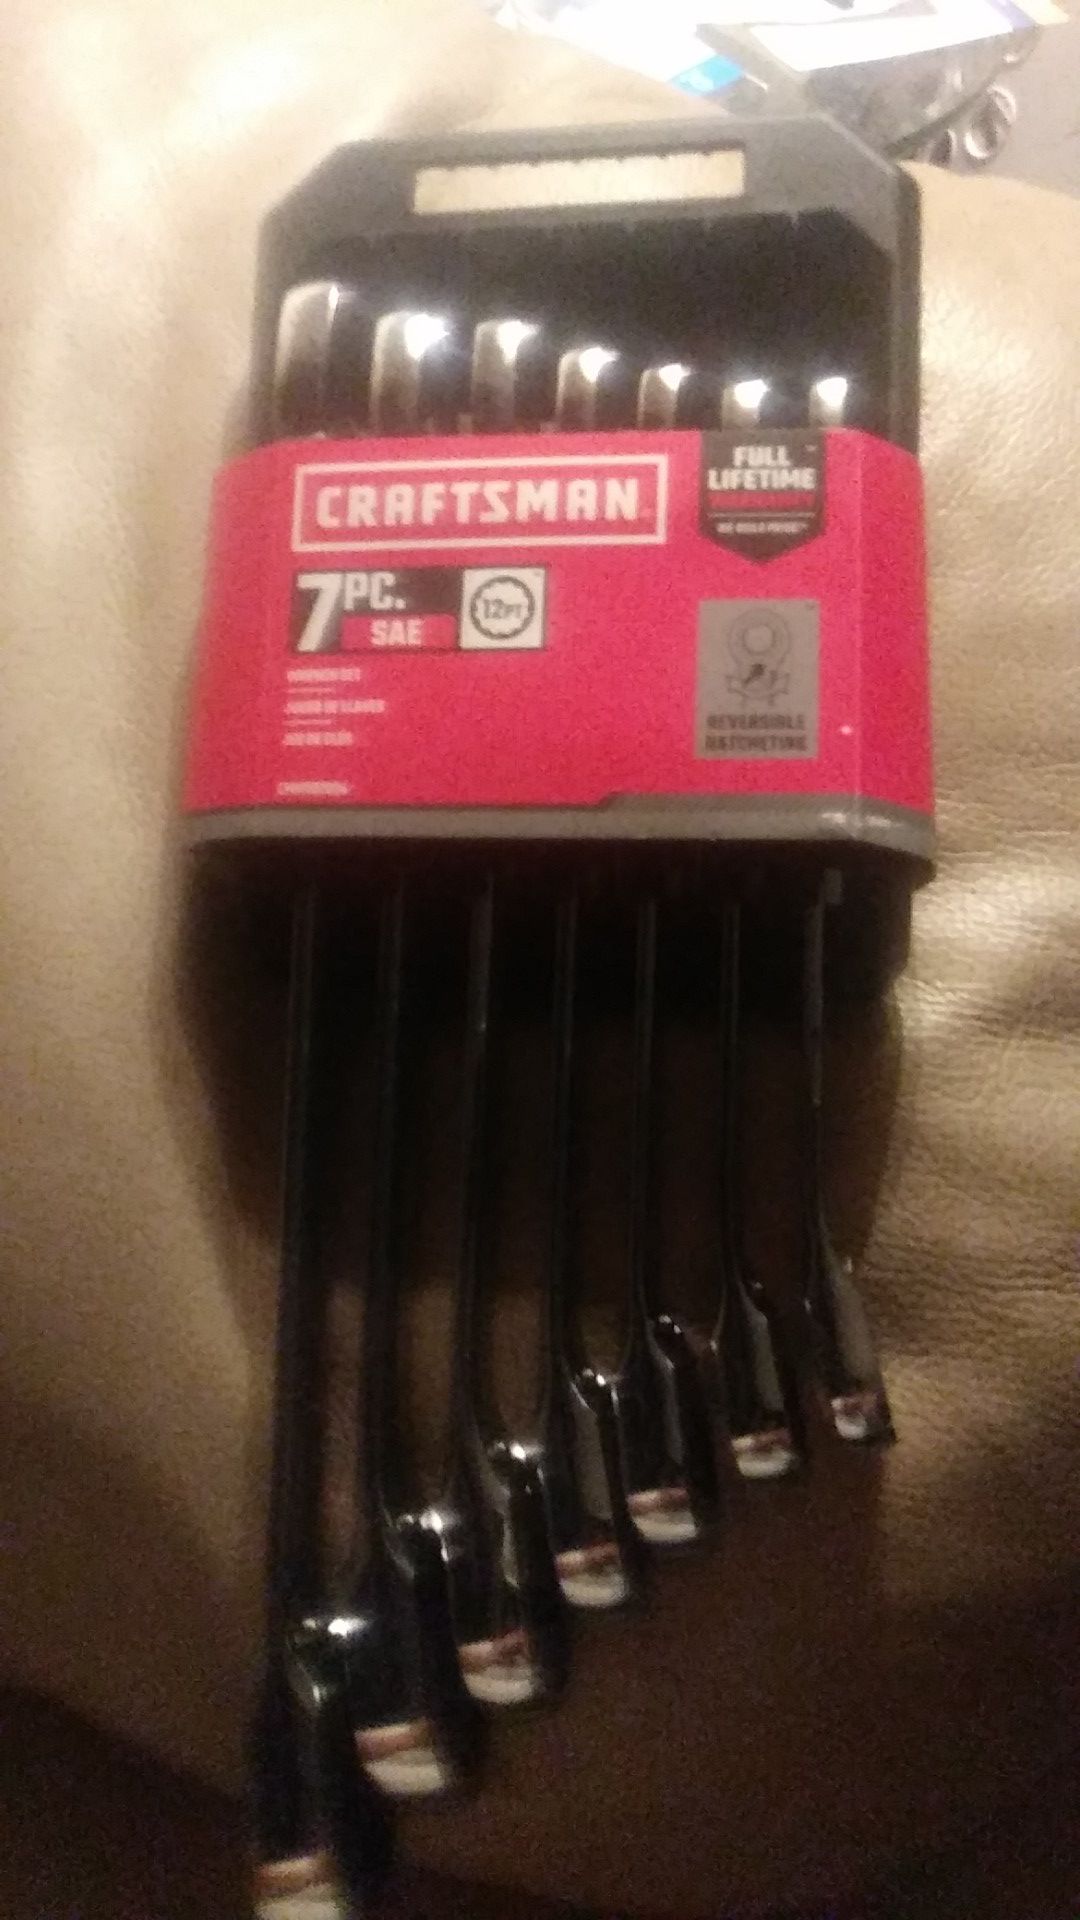 Craftsman standard and metric ratcheting wrenches